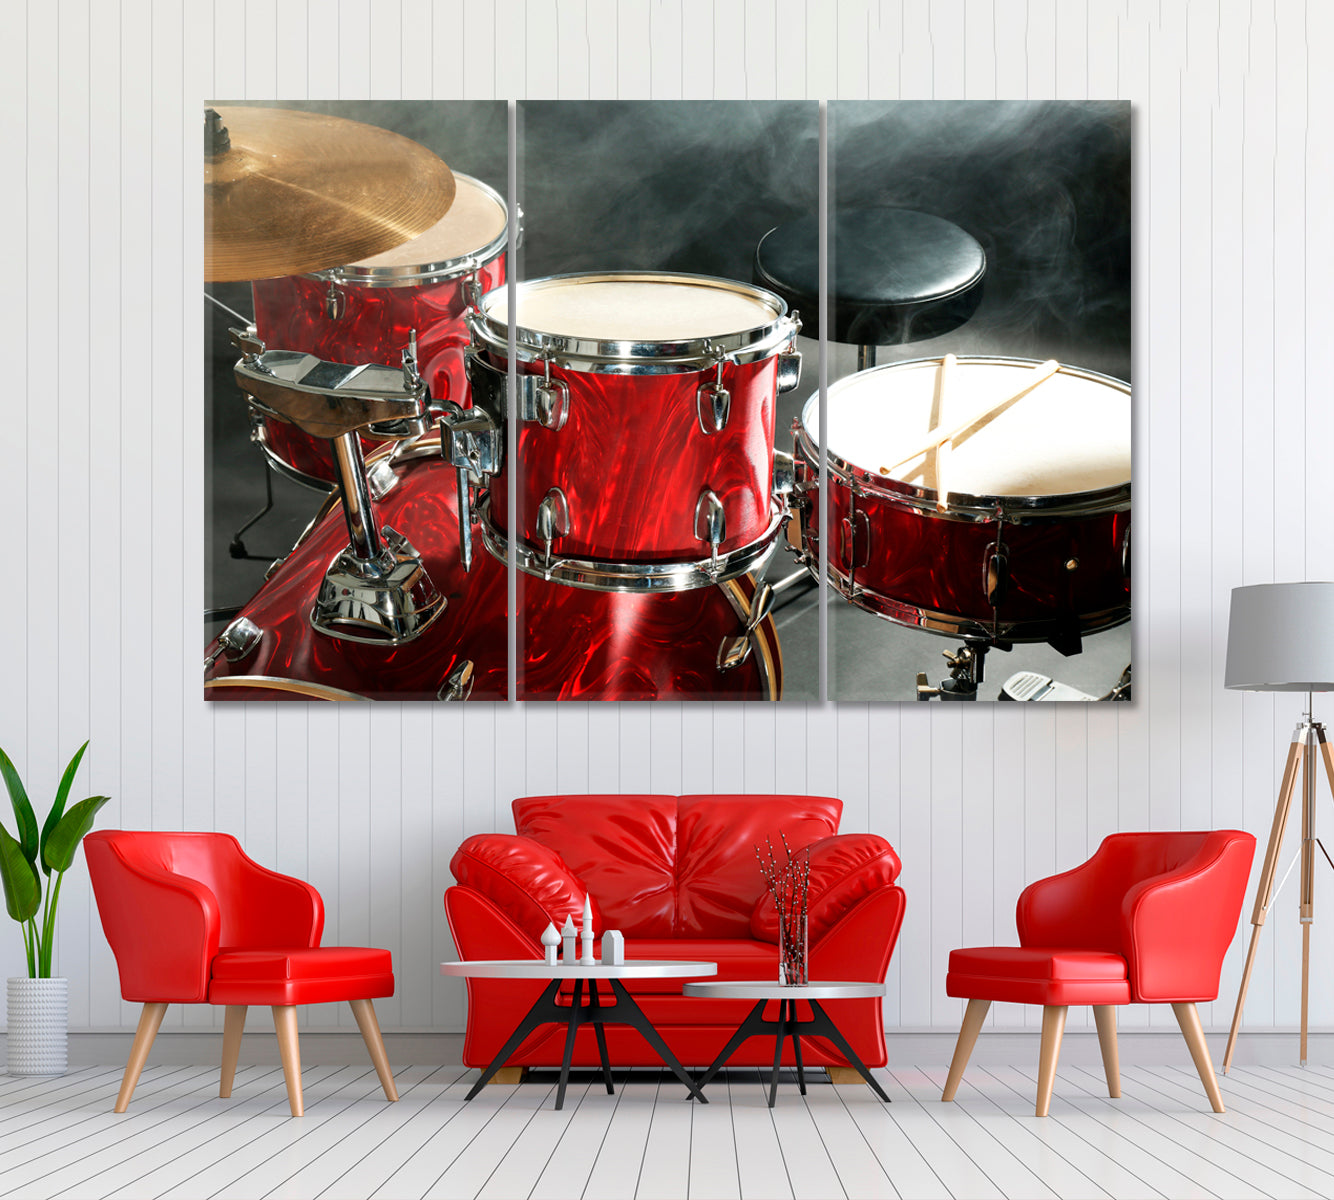 Drum Set in Smoke Canvas Print ArtLexy 3 Panels 36"x24" inches 